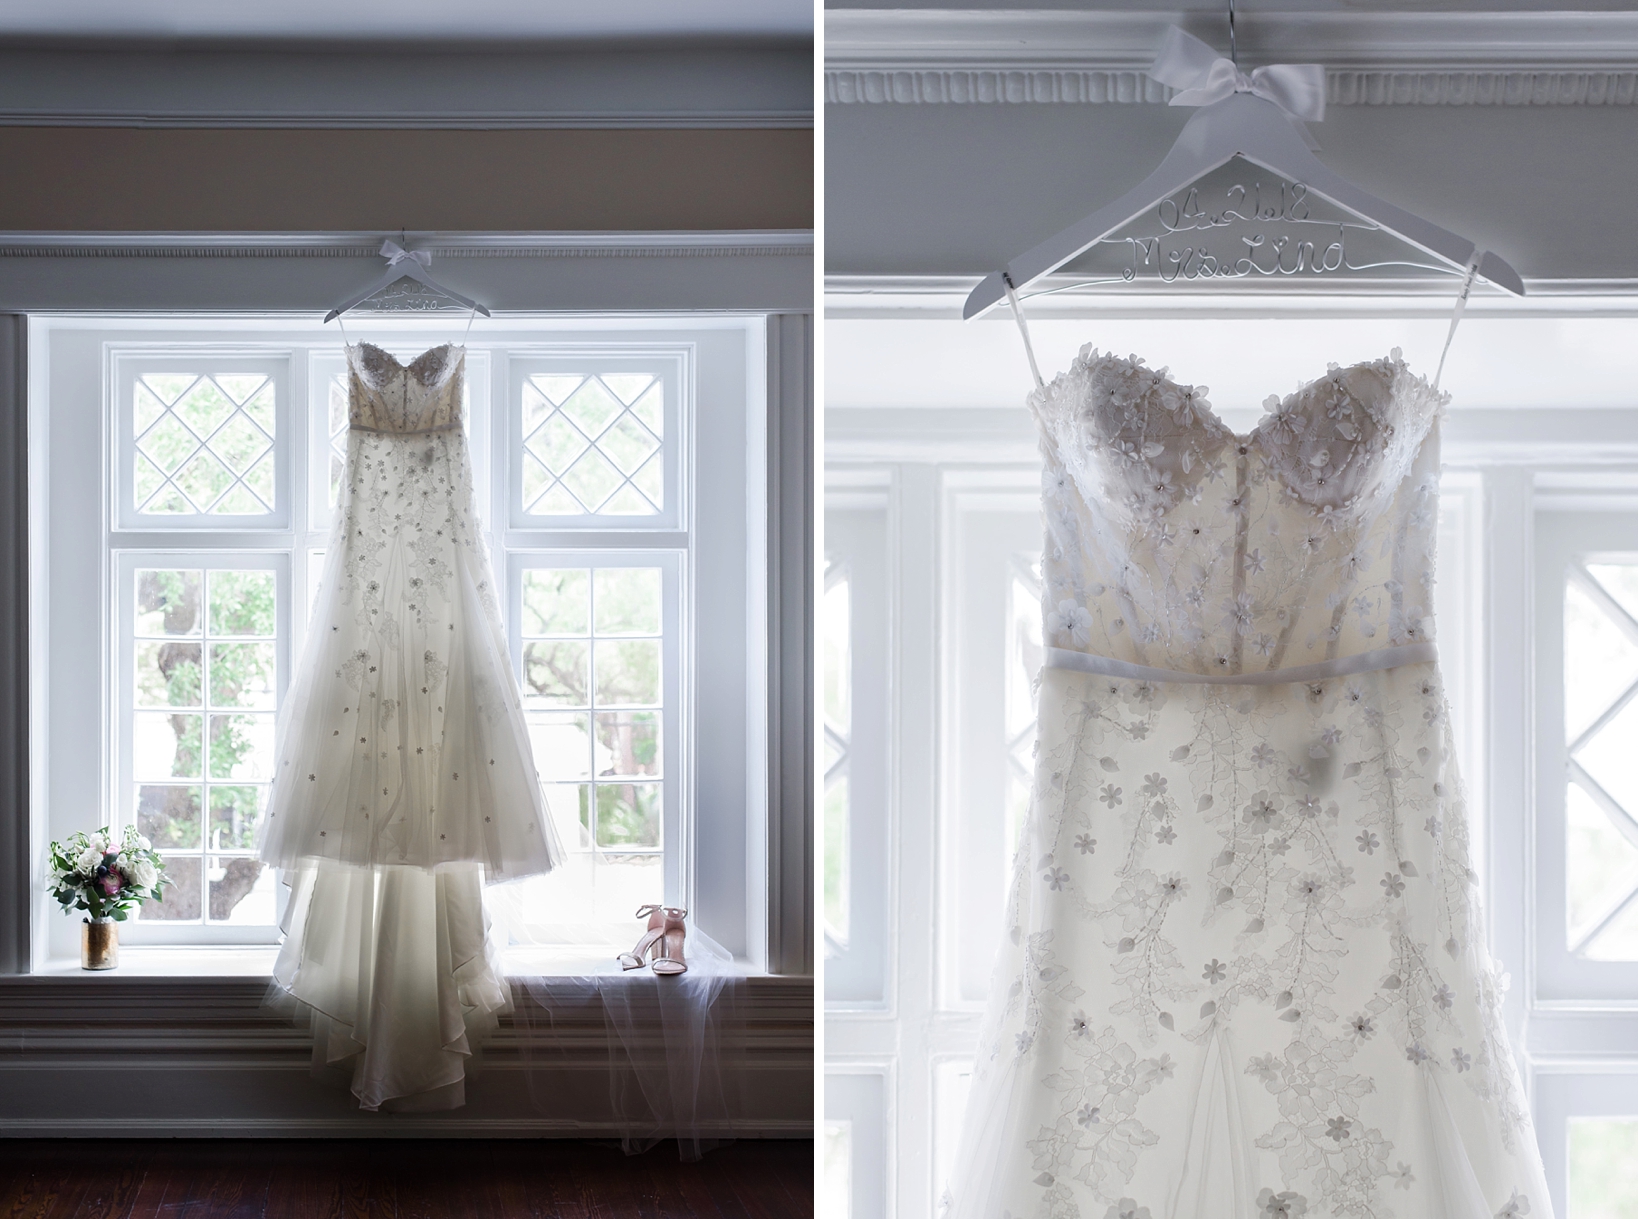 The wedding dress with custom hanger and bright back lit shoes and bouquet